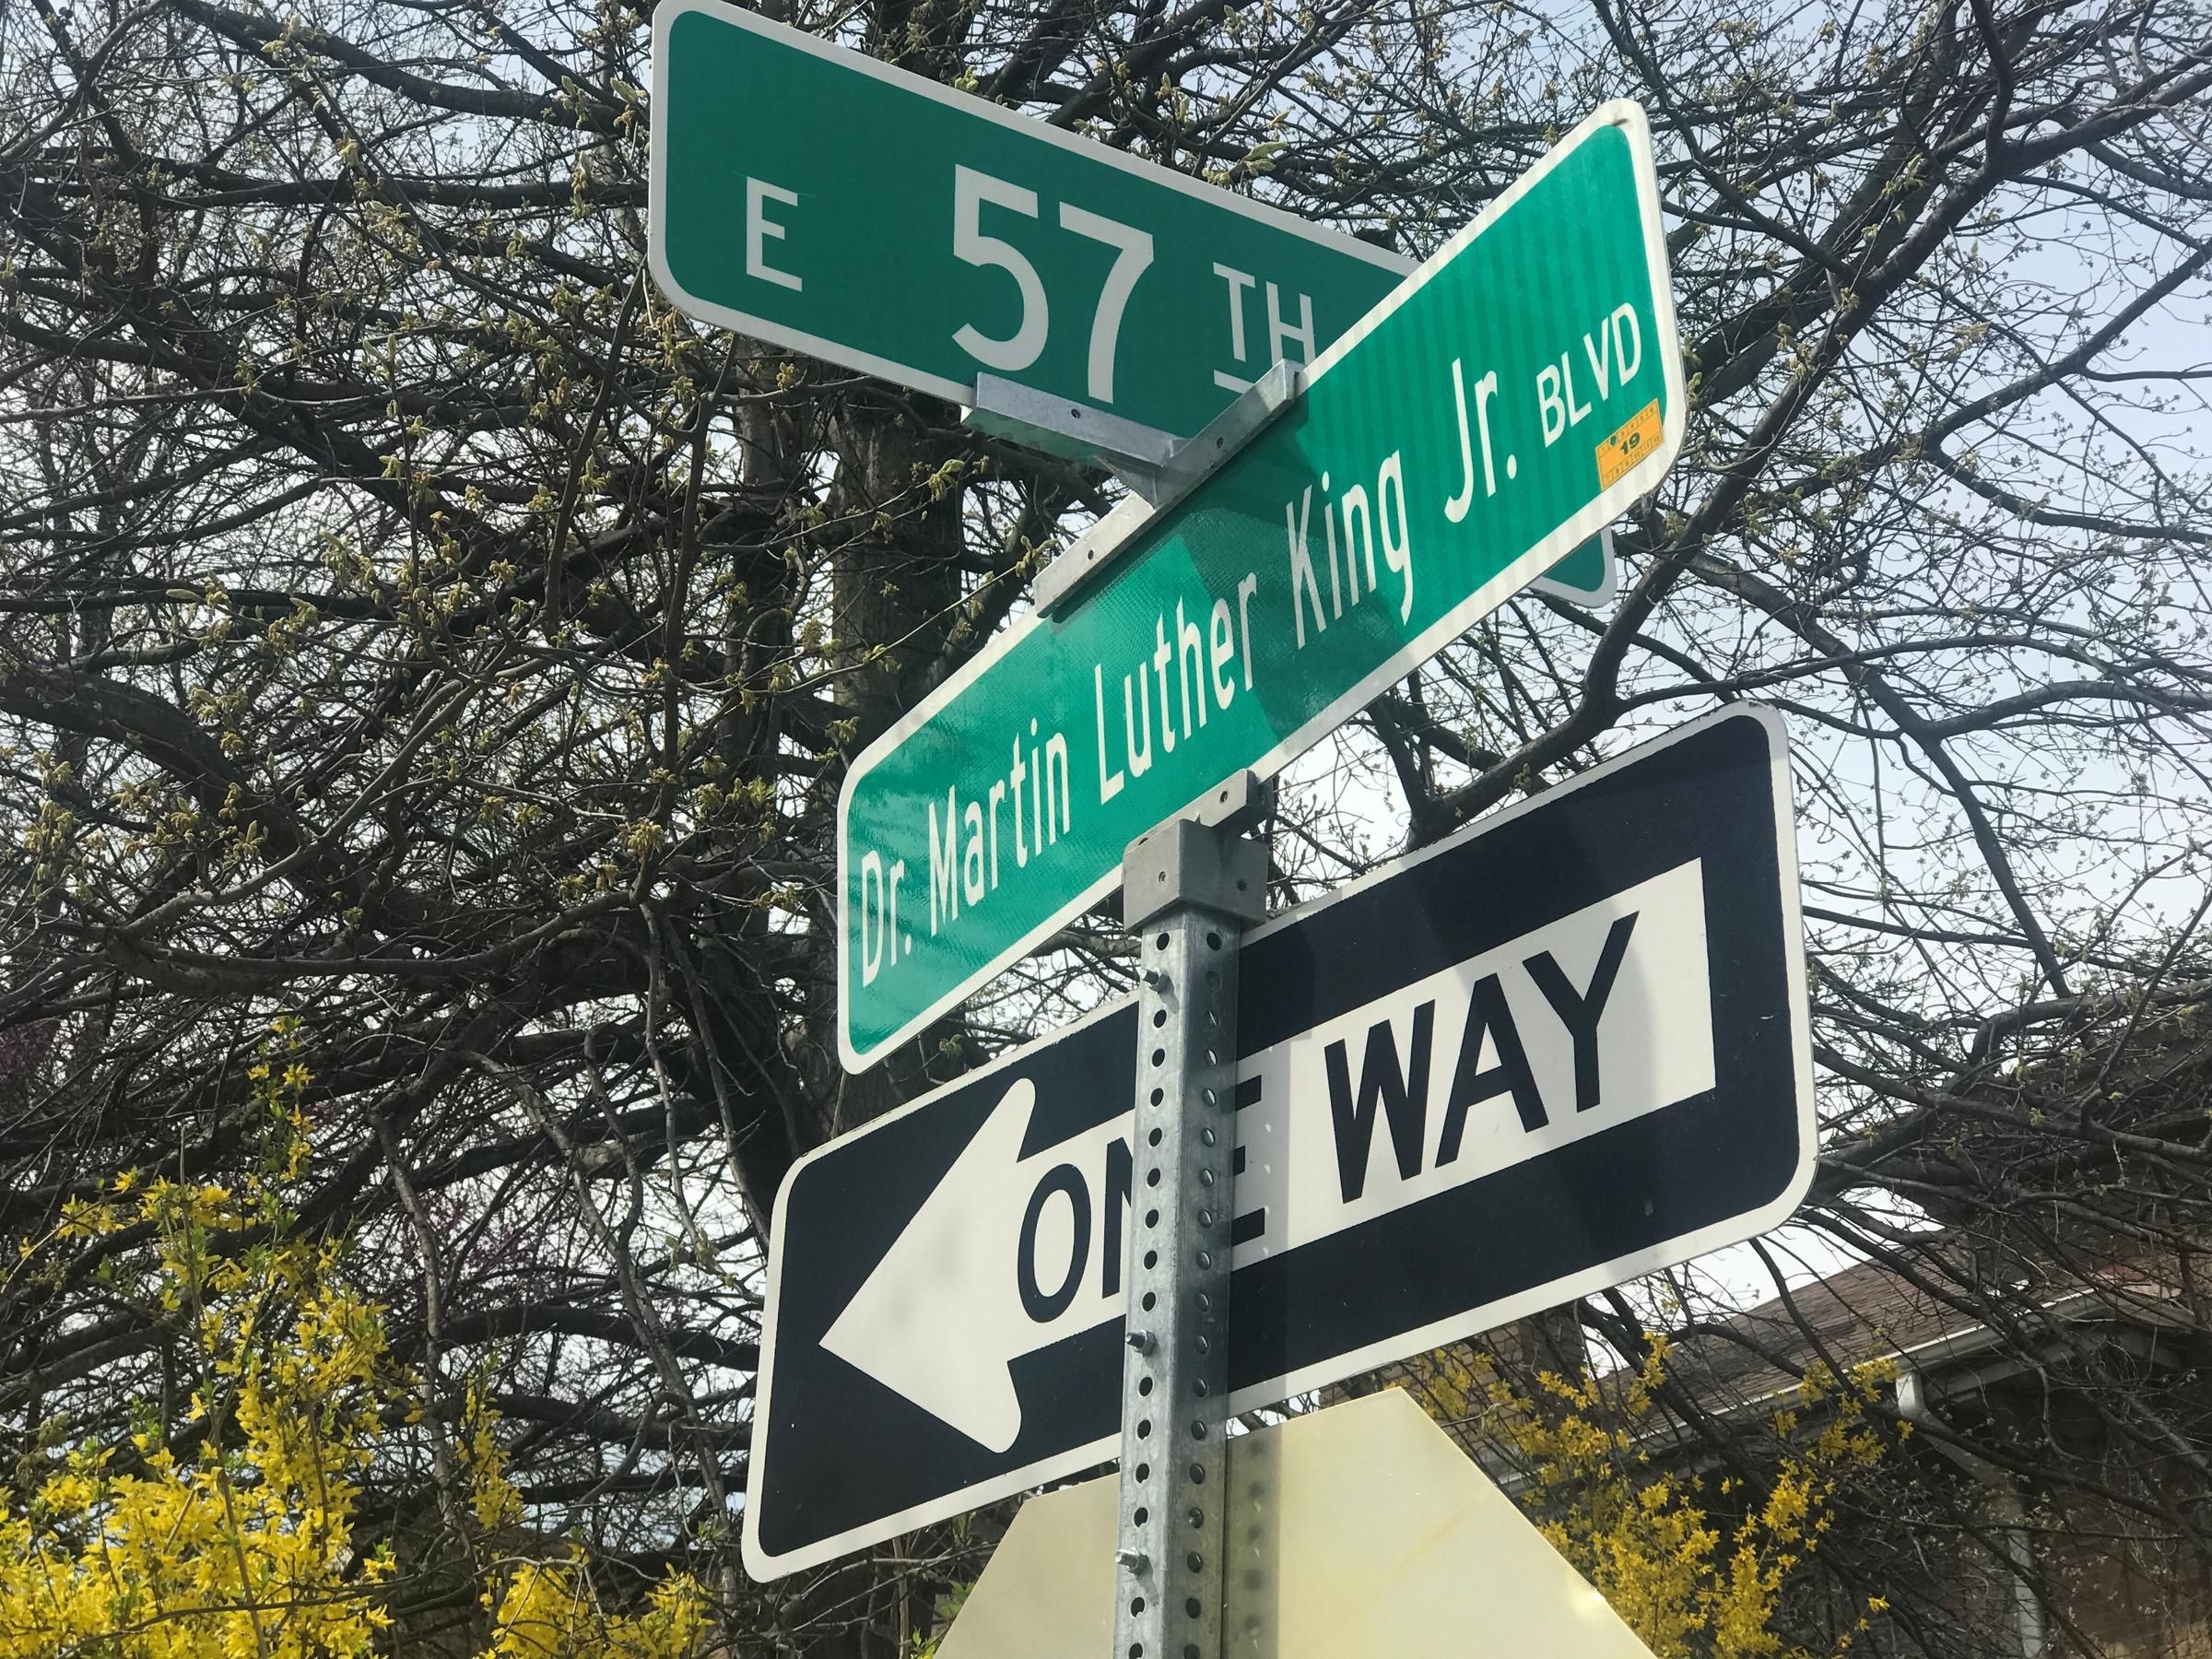 The Martin Luther King Jr. street signs that were put up by in the spring will come down by spring 2020. Image by Michelle Tyrene Johnson / KCUR 89.3. United States, 2019.